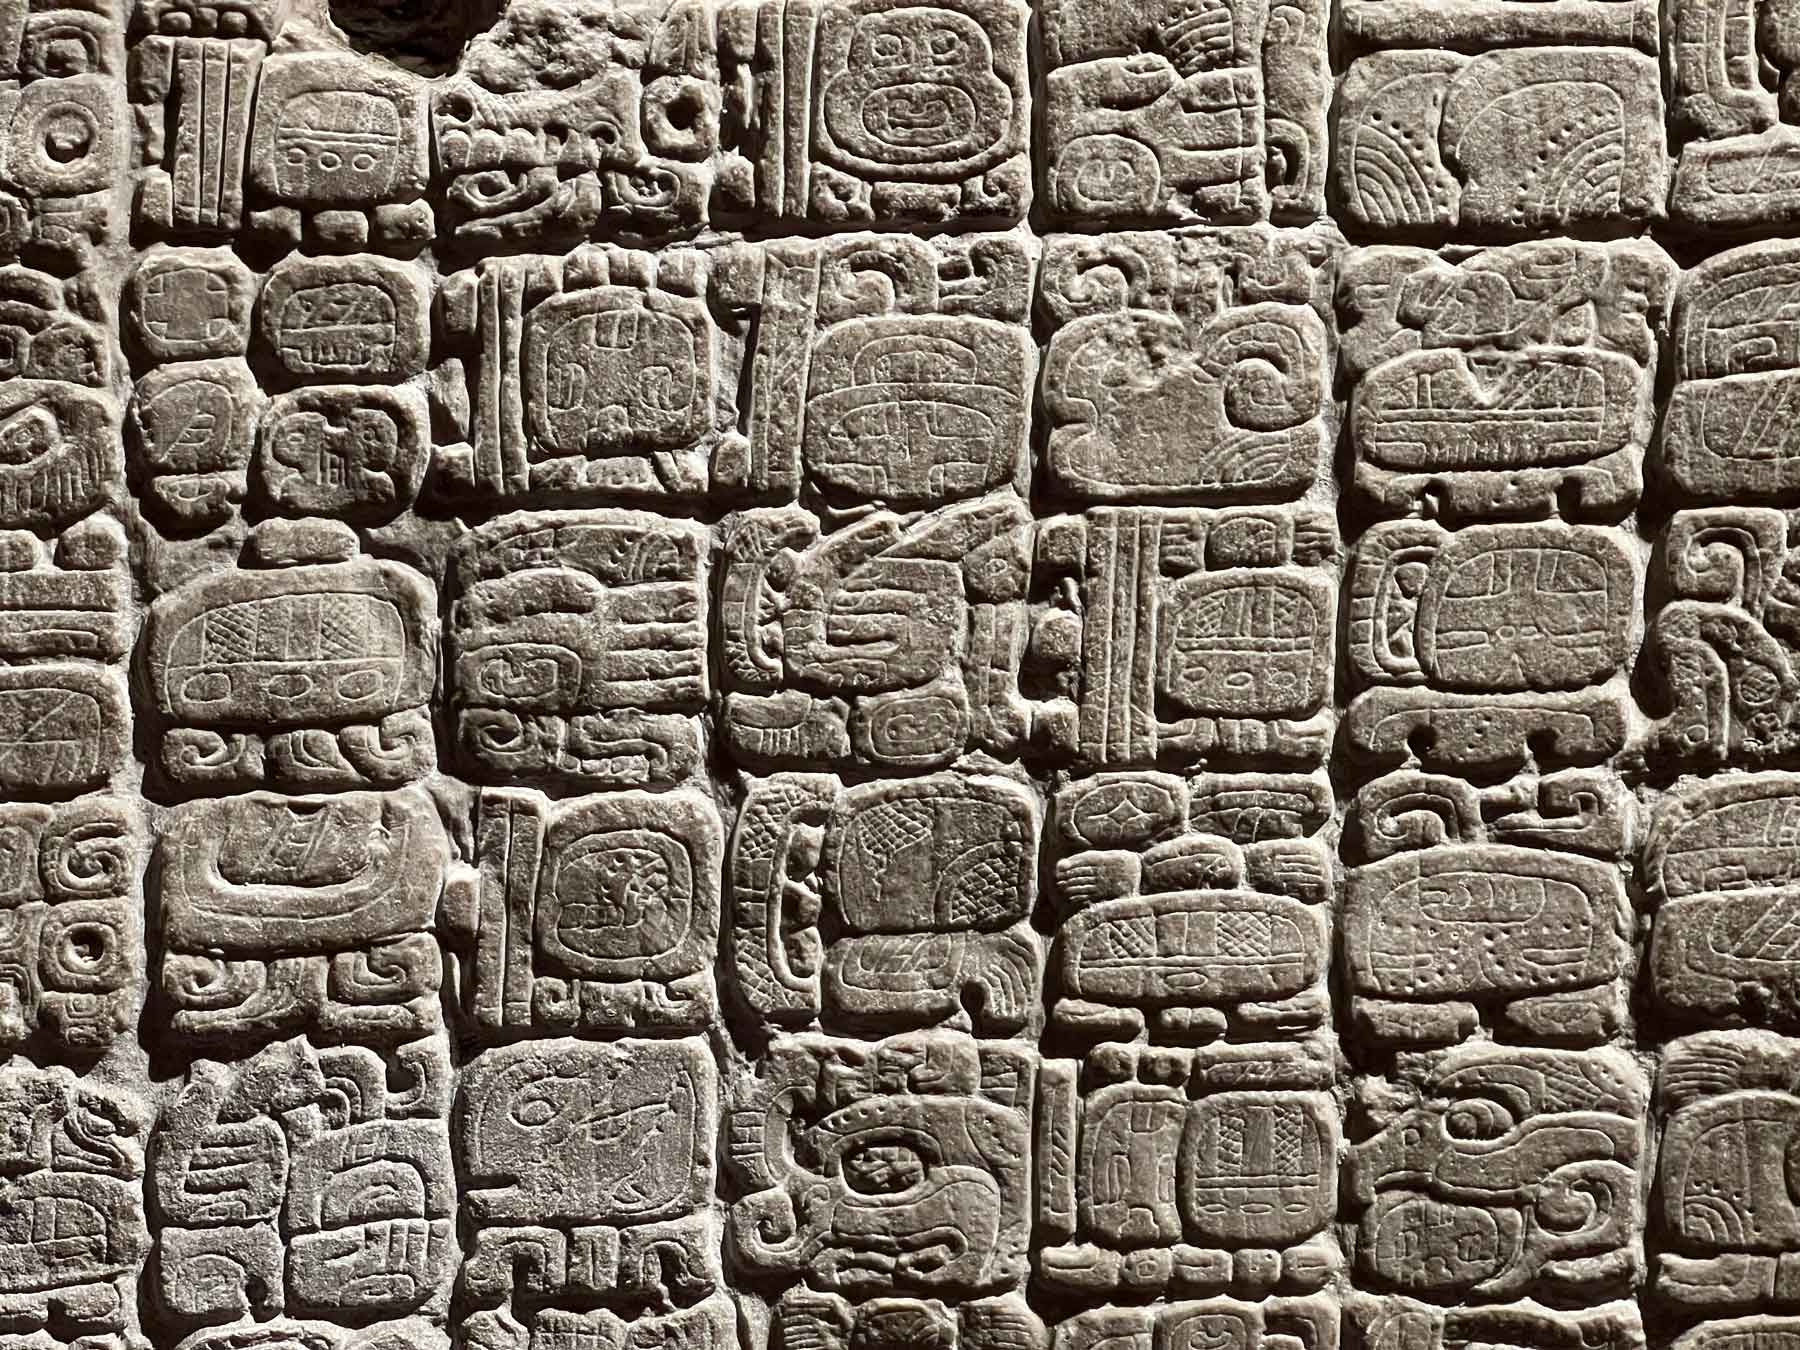 Maya glyphs, showing give rows of seven carved glyphs